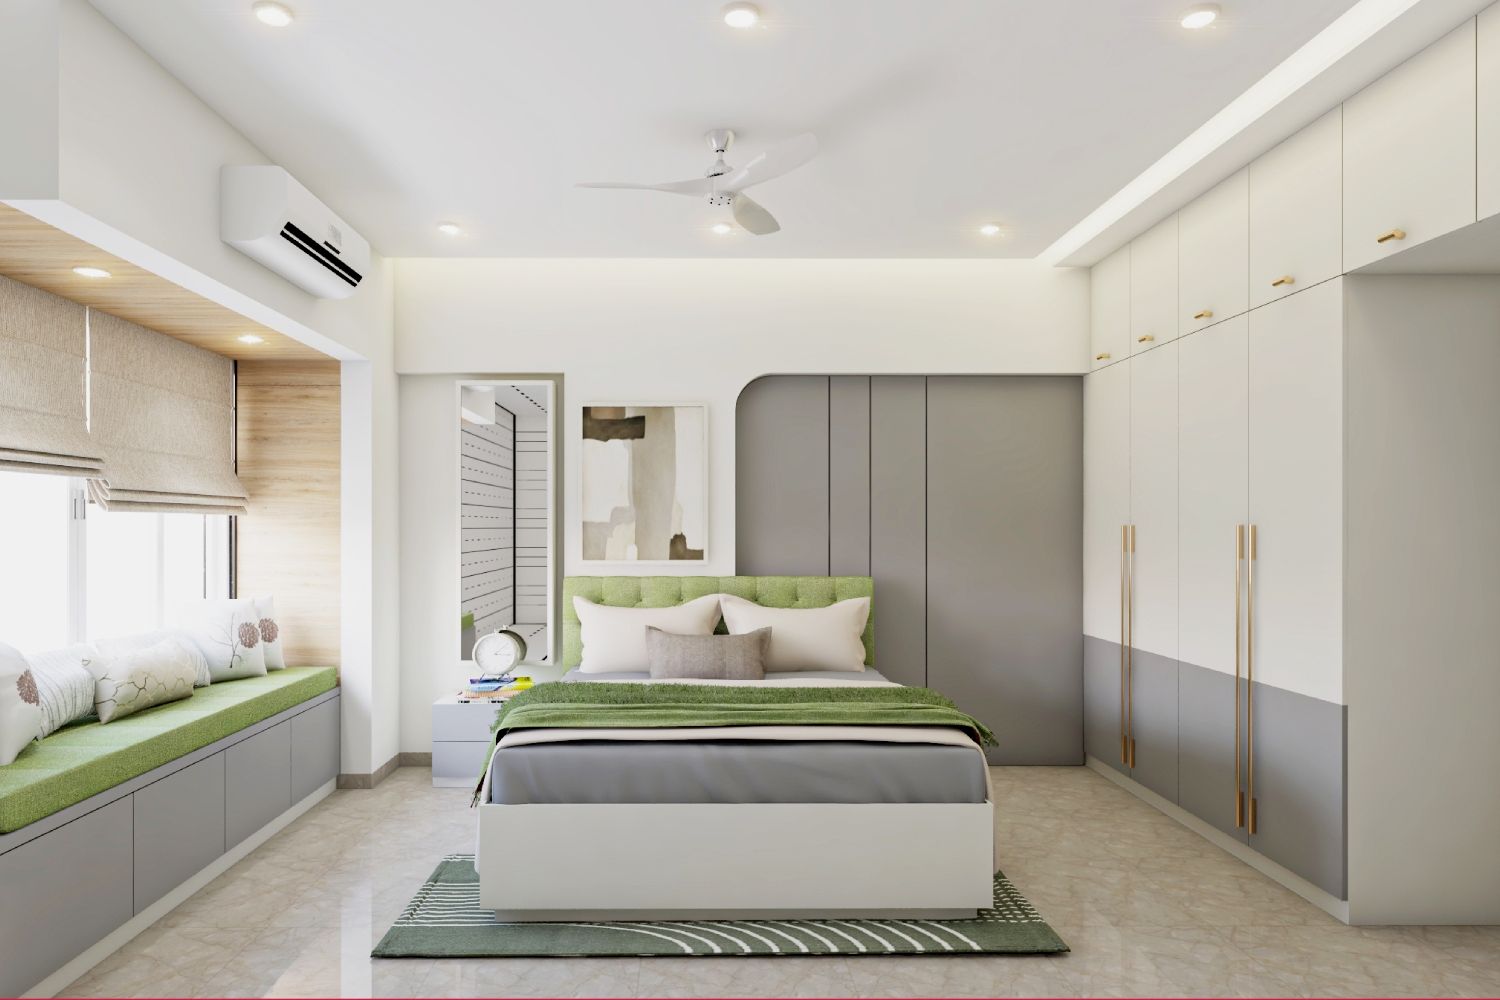 Contemporary Single-Layered Gypsum Bedroom Ceiling Design With Grey And Green Interiors